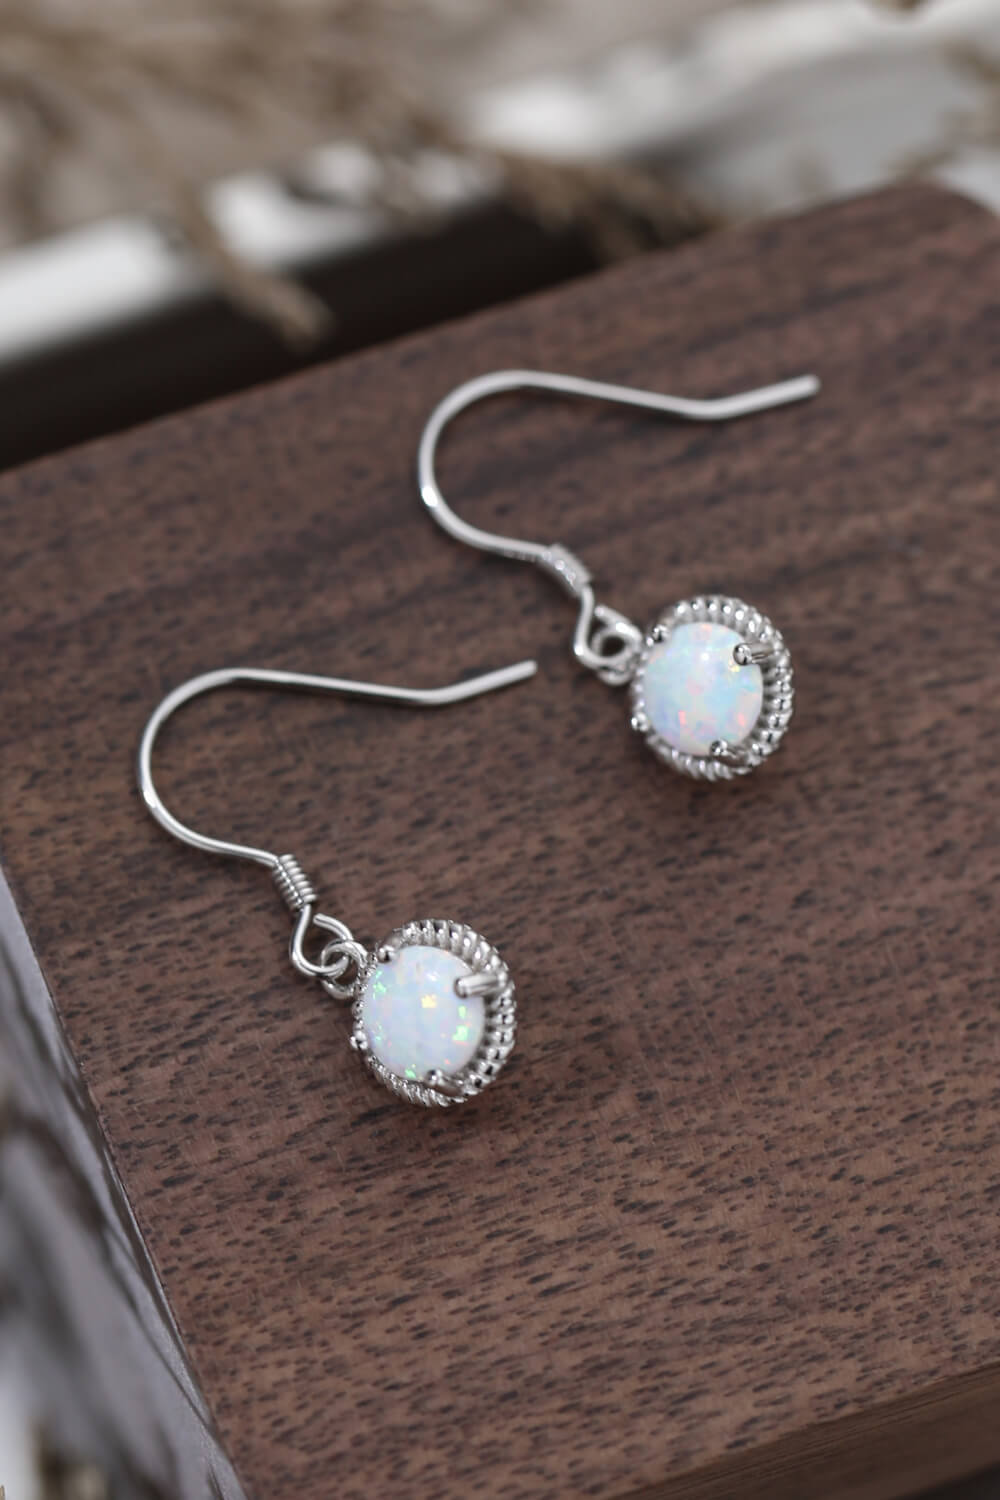 Join The Fun Opal Earrings - Dazzling Whispers of Romance - Add a Touch of Enchantment to Your Look - Guy Christopher